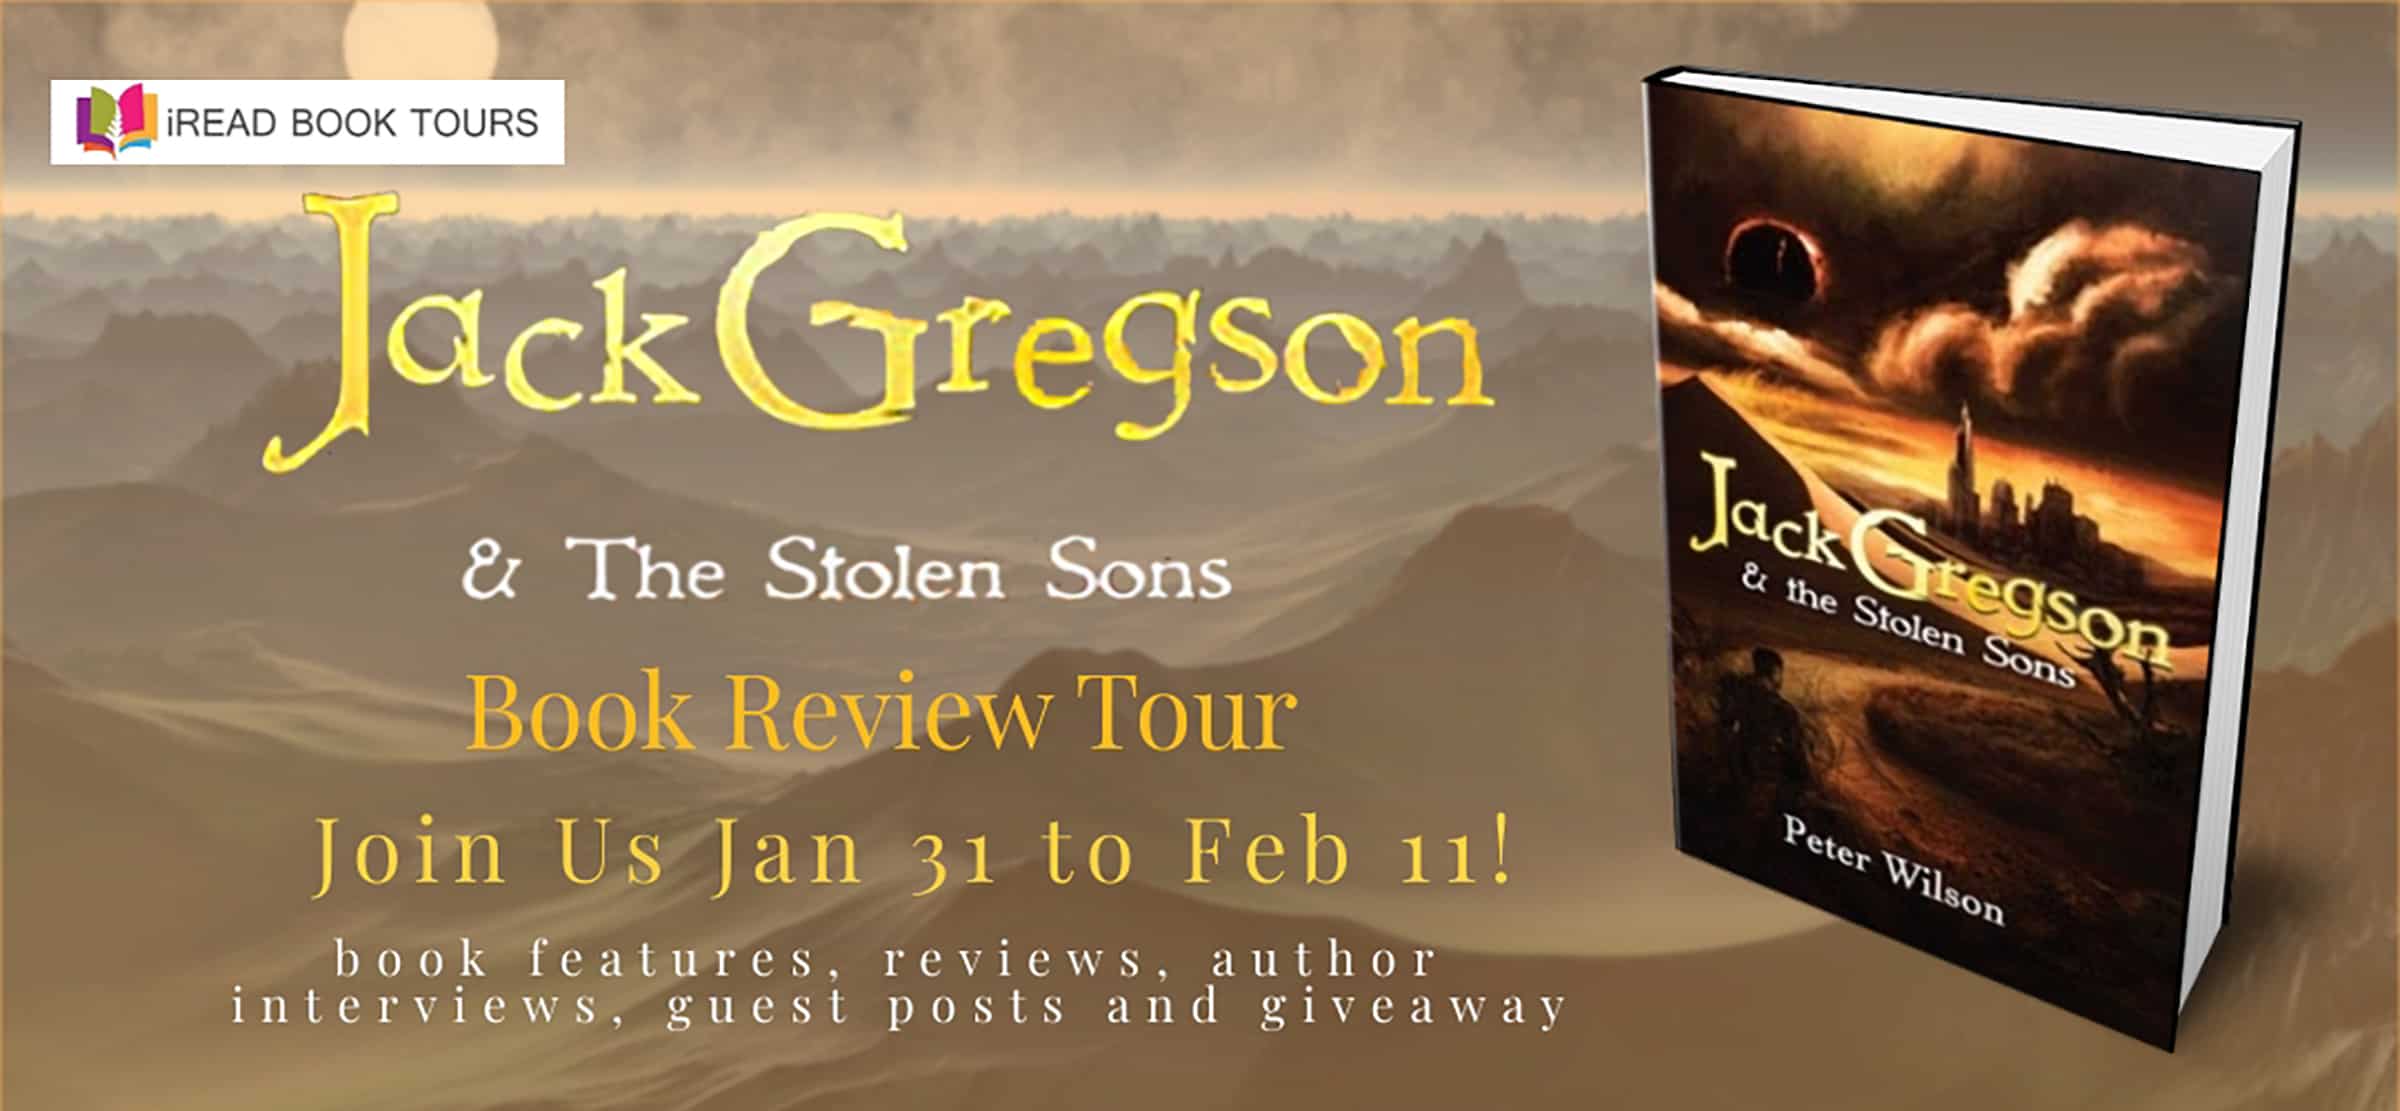 Jack Gregson and the Stolen Sons by Peter Wilson (Jack Gregson Series #2) | Giveaway, Author Interview, Review